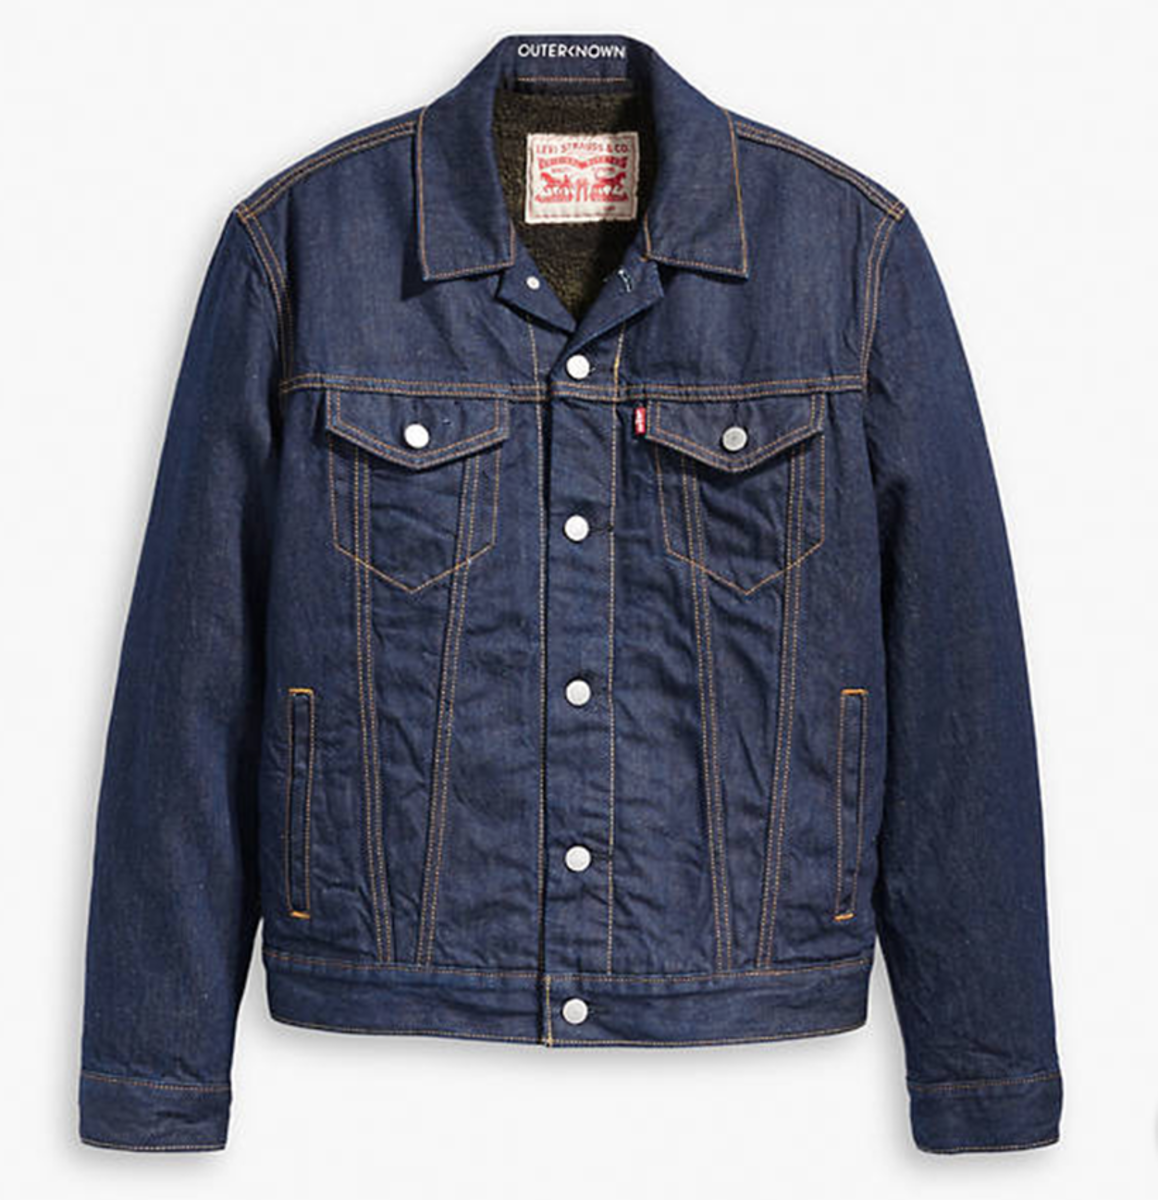 Help Save The World With These Clothes From Levi's x Outerknown - Men's ...